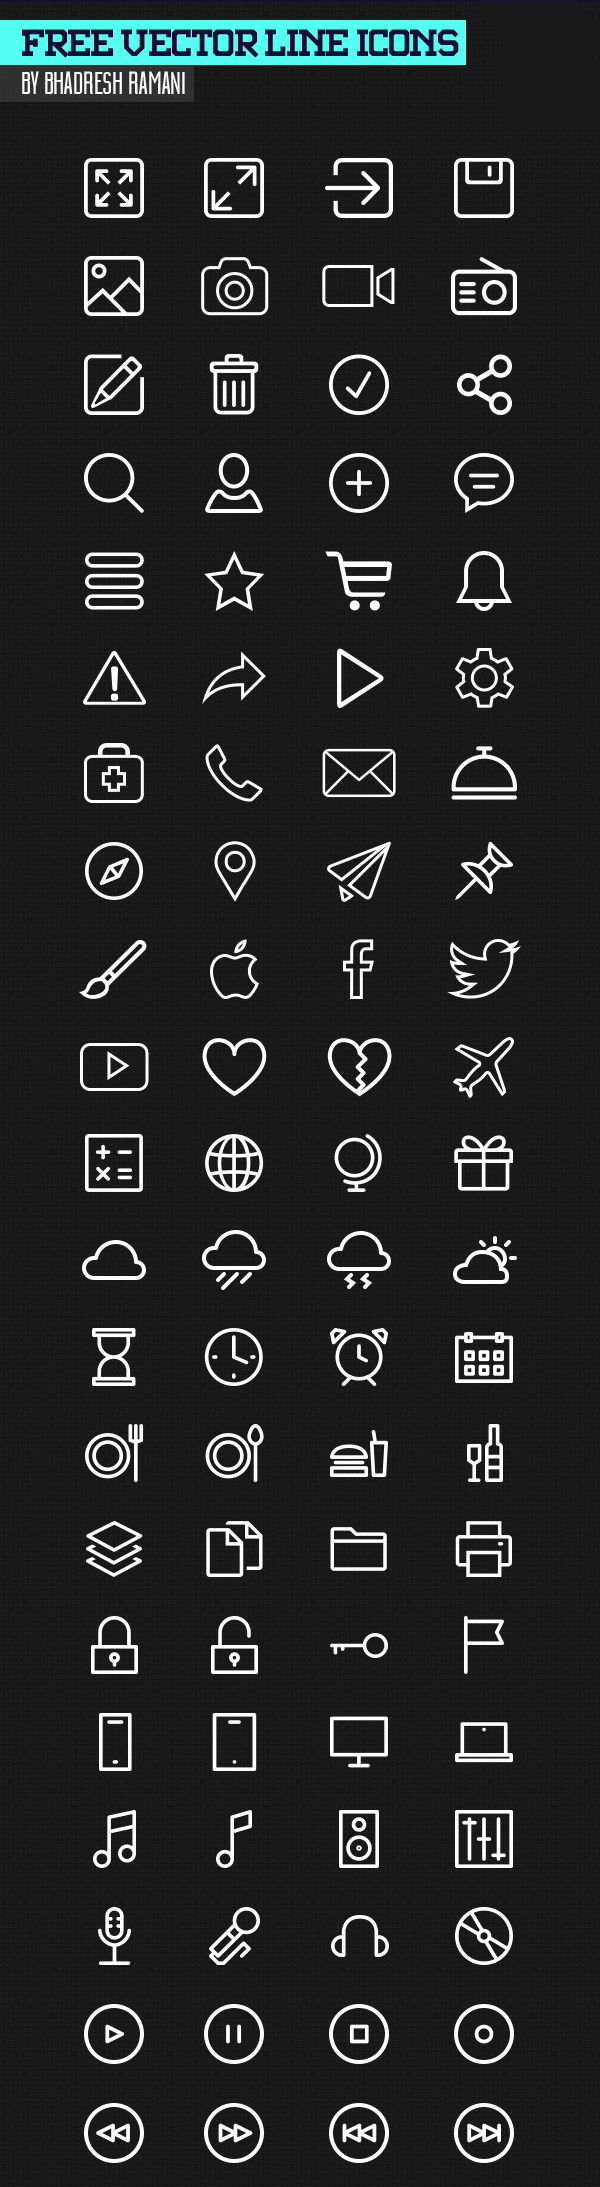 Free Vector Line Icons - 84 Icons